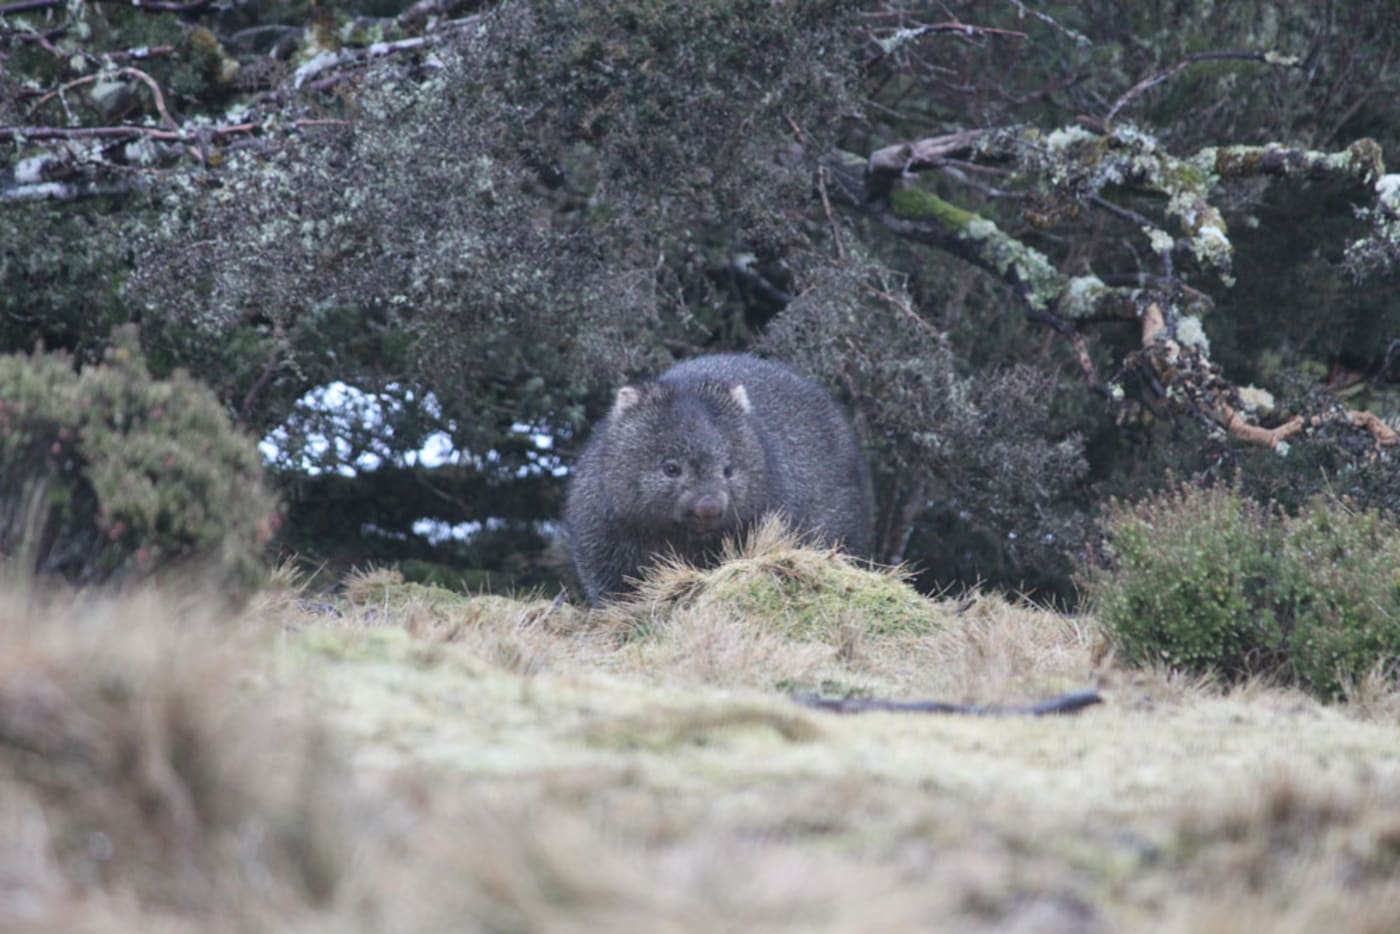 A wombat at the Devils@Cradle conservation facility= Tasmania